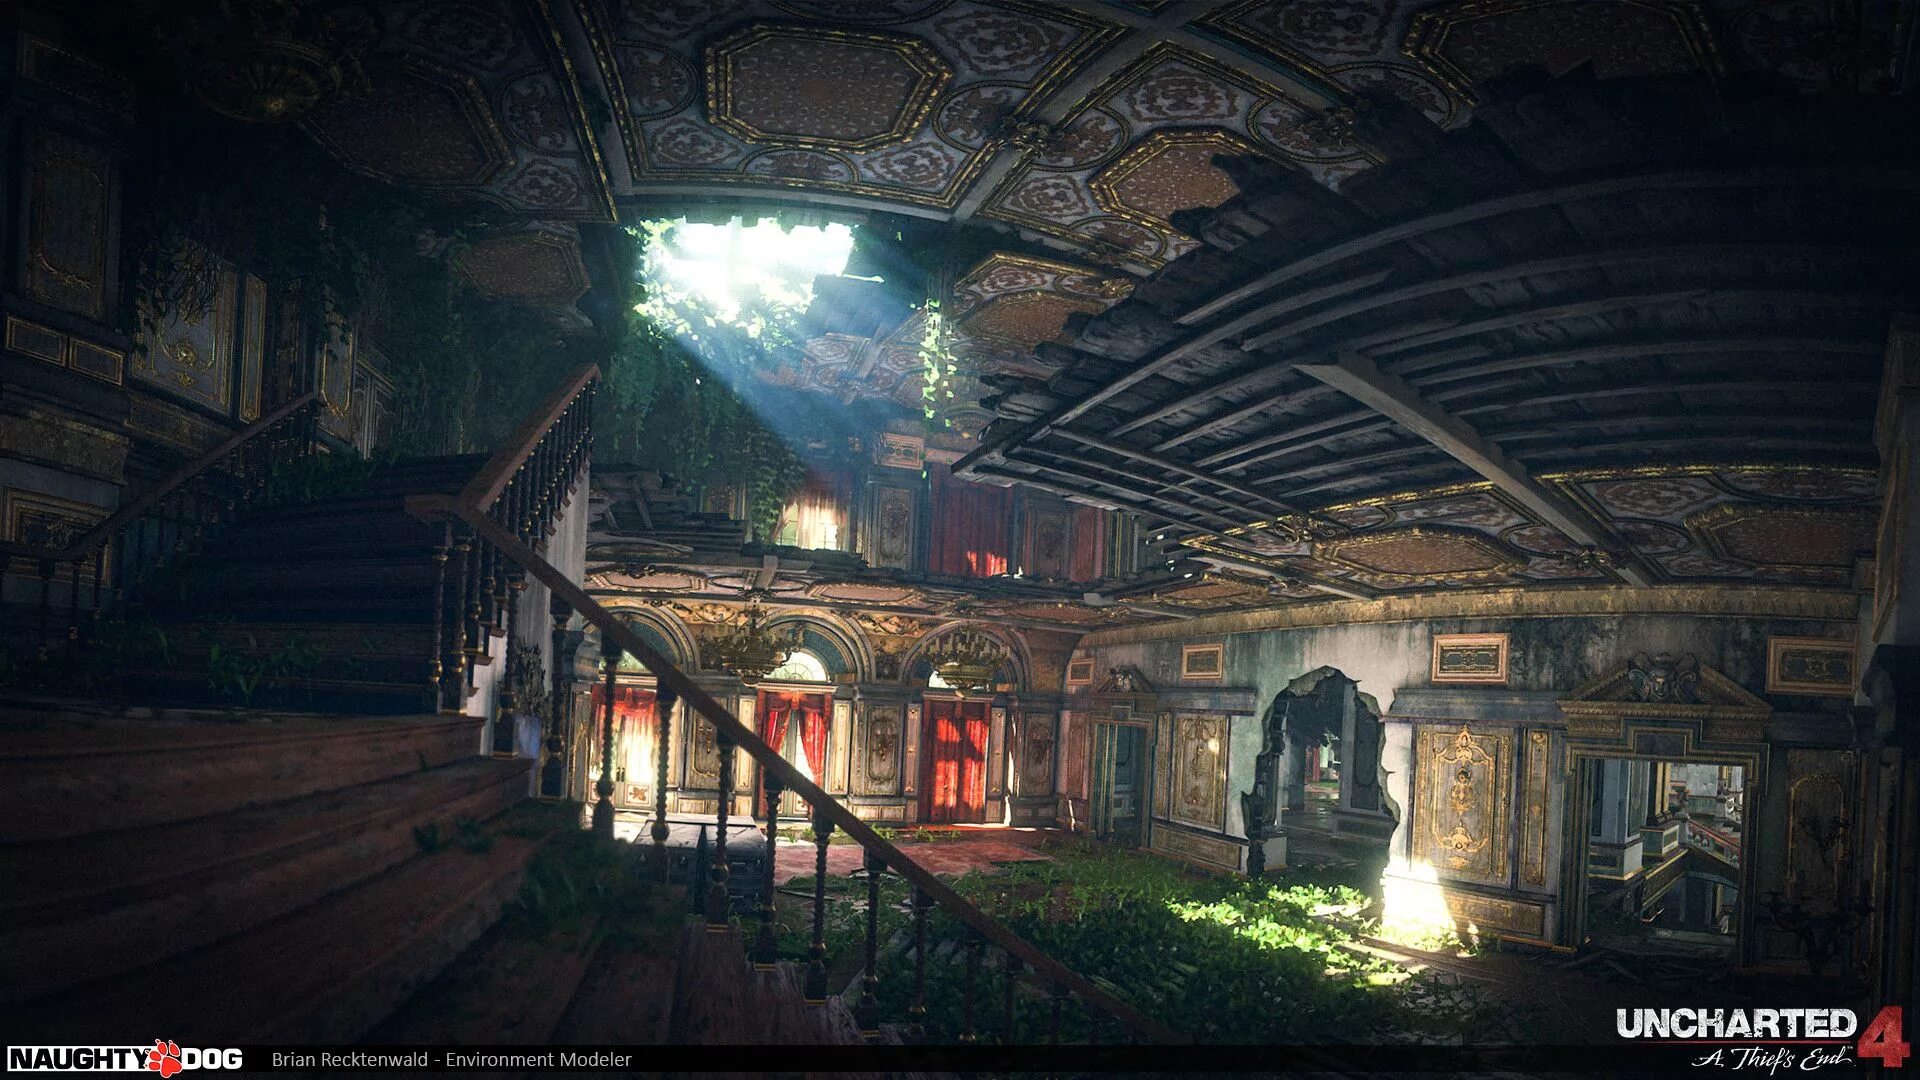 Аватар ворлд игра особняк. Uncharted 4 environment. Uncharted 4 Concept Art. Либерталия Uncharted 4. Uncharted 4 Art.